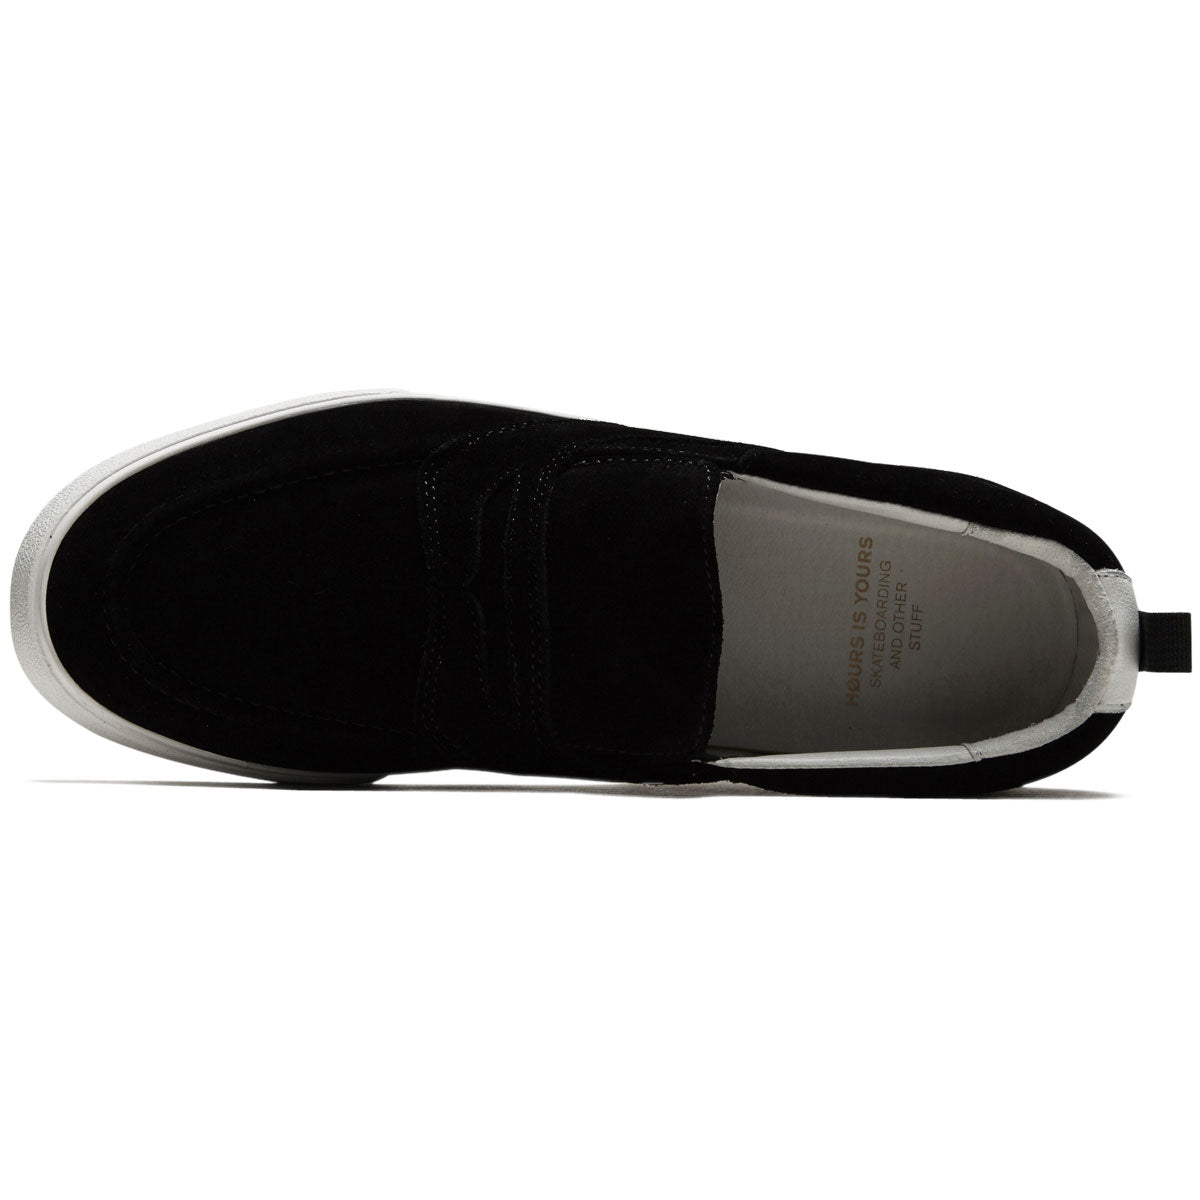 Hours Is Yours Cohiba Sl30 Shoes - Classic Black image 3